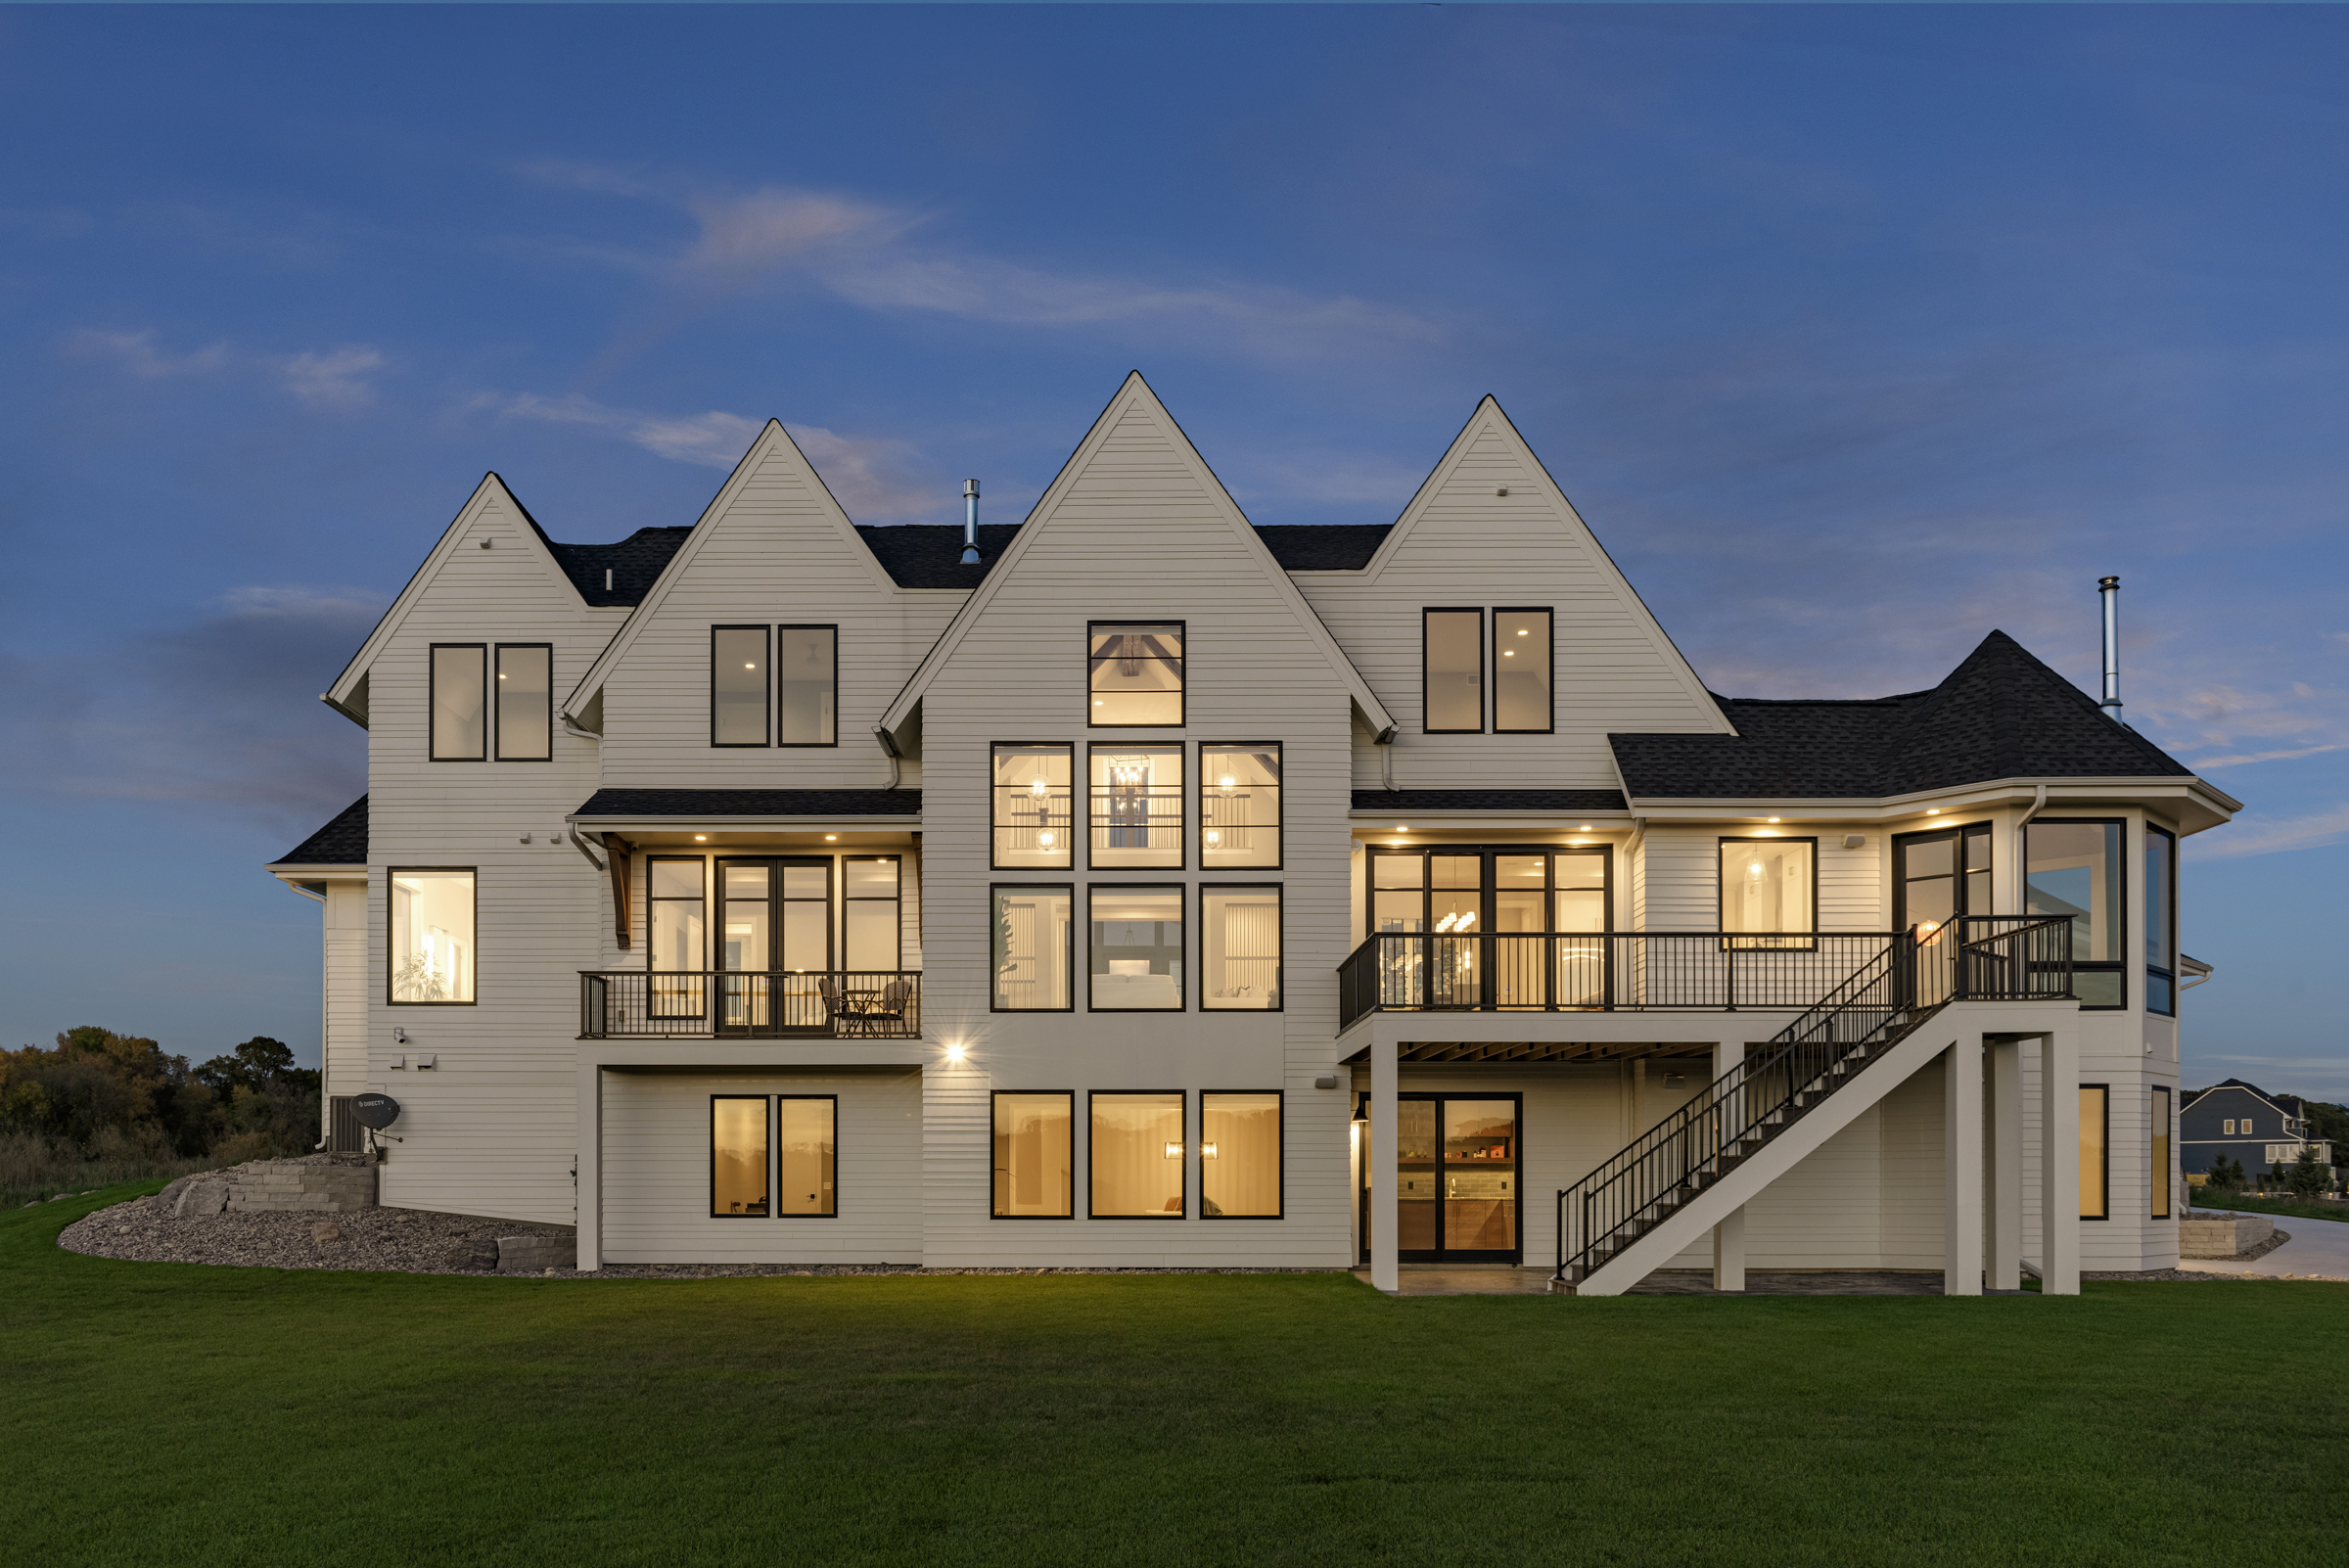 The exterior of a transitional custom home at dusk.